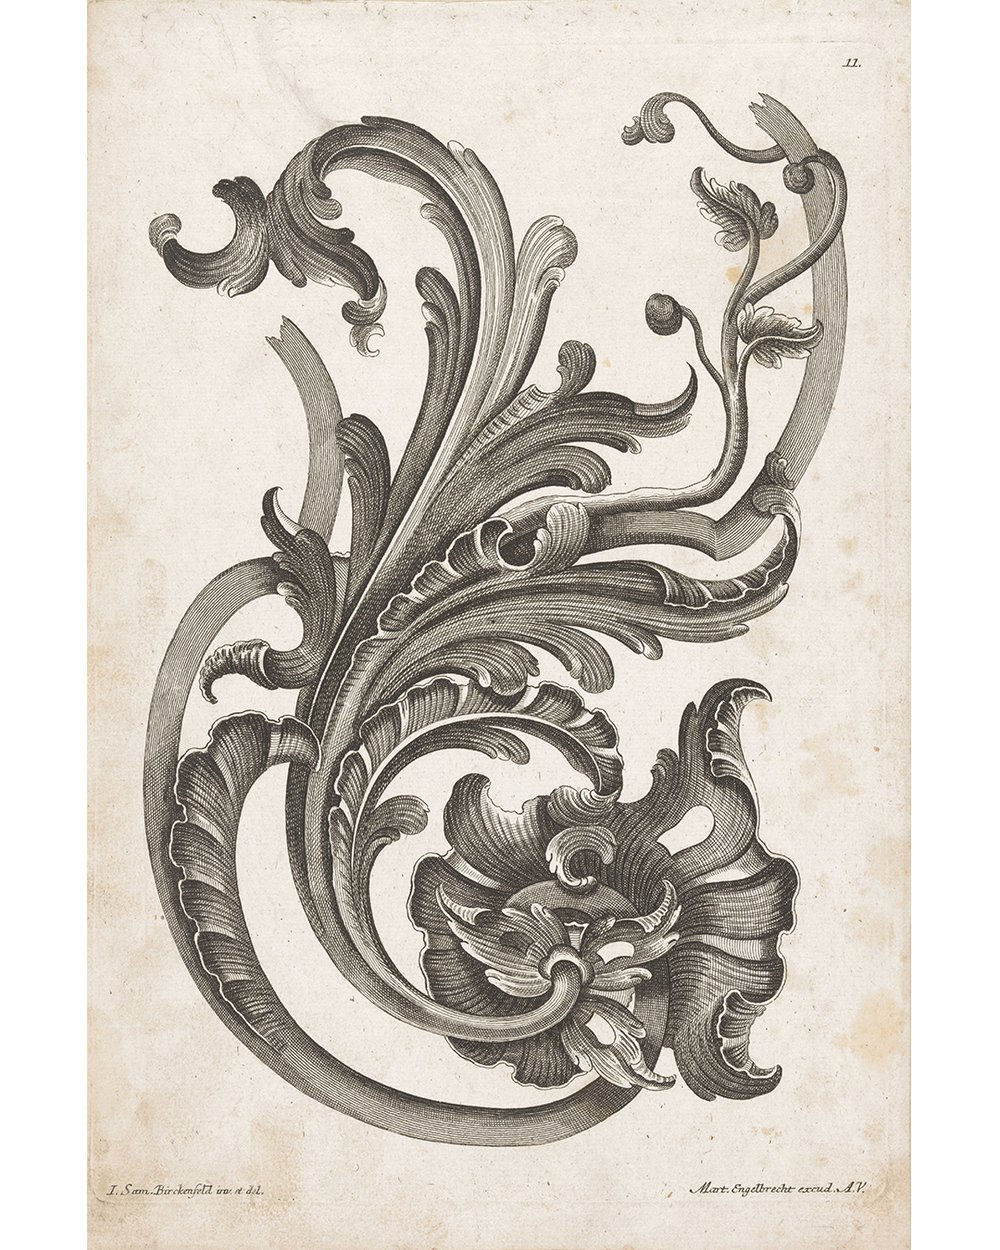 ''Wrought ironwork with floral motifs'' (1694 - 1756)